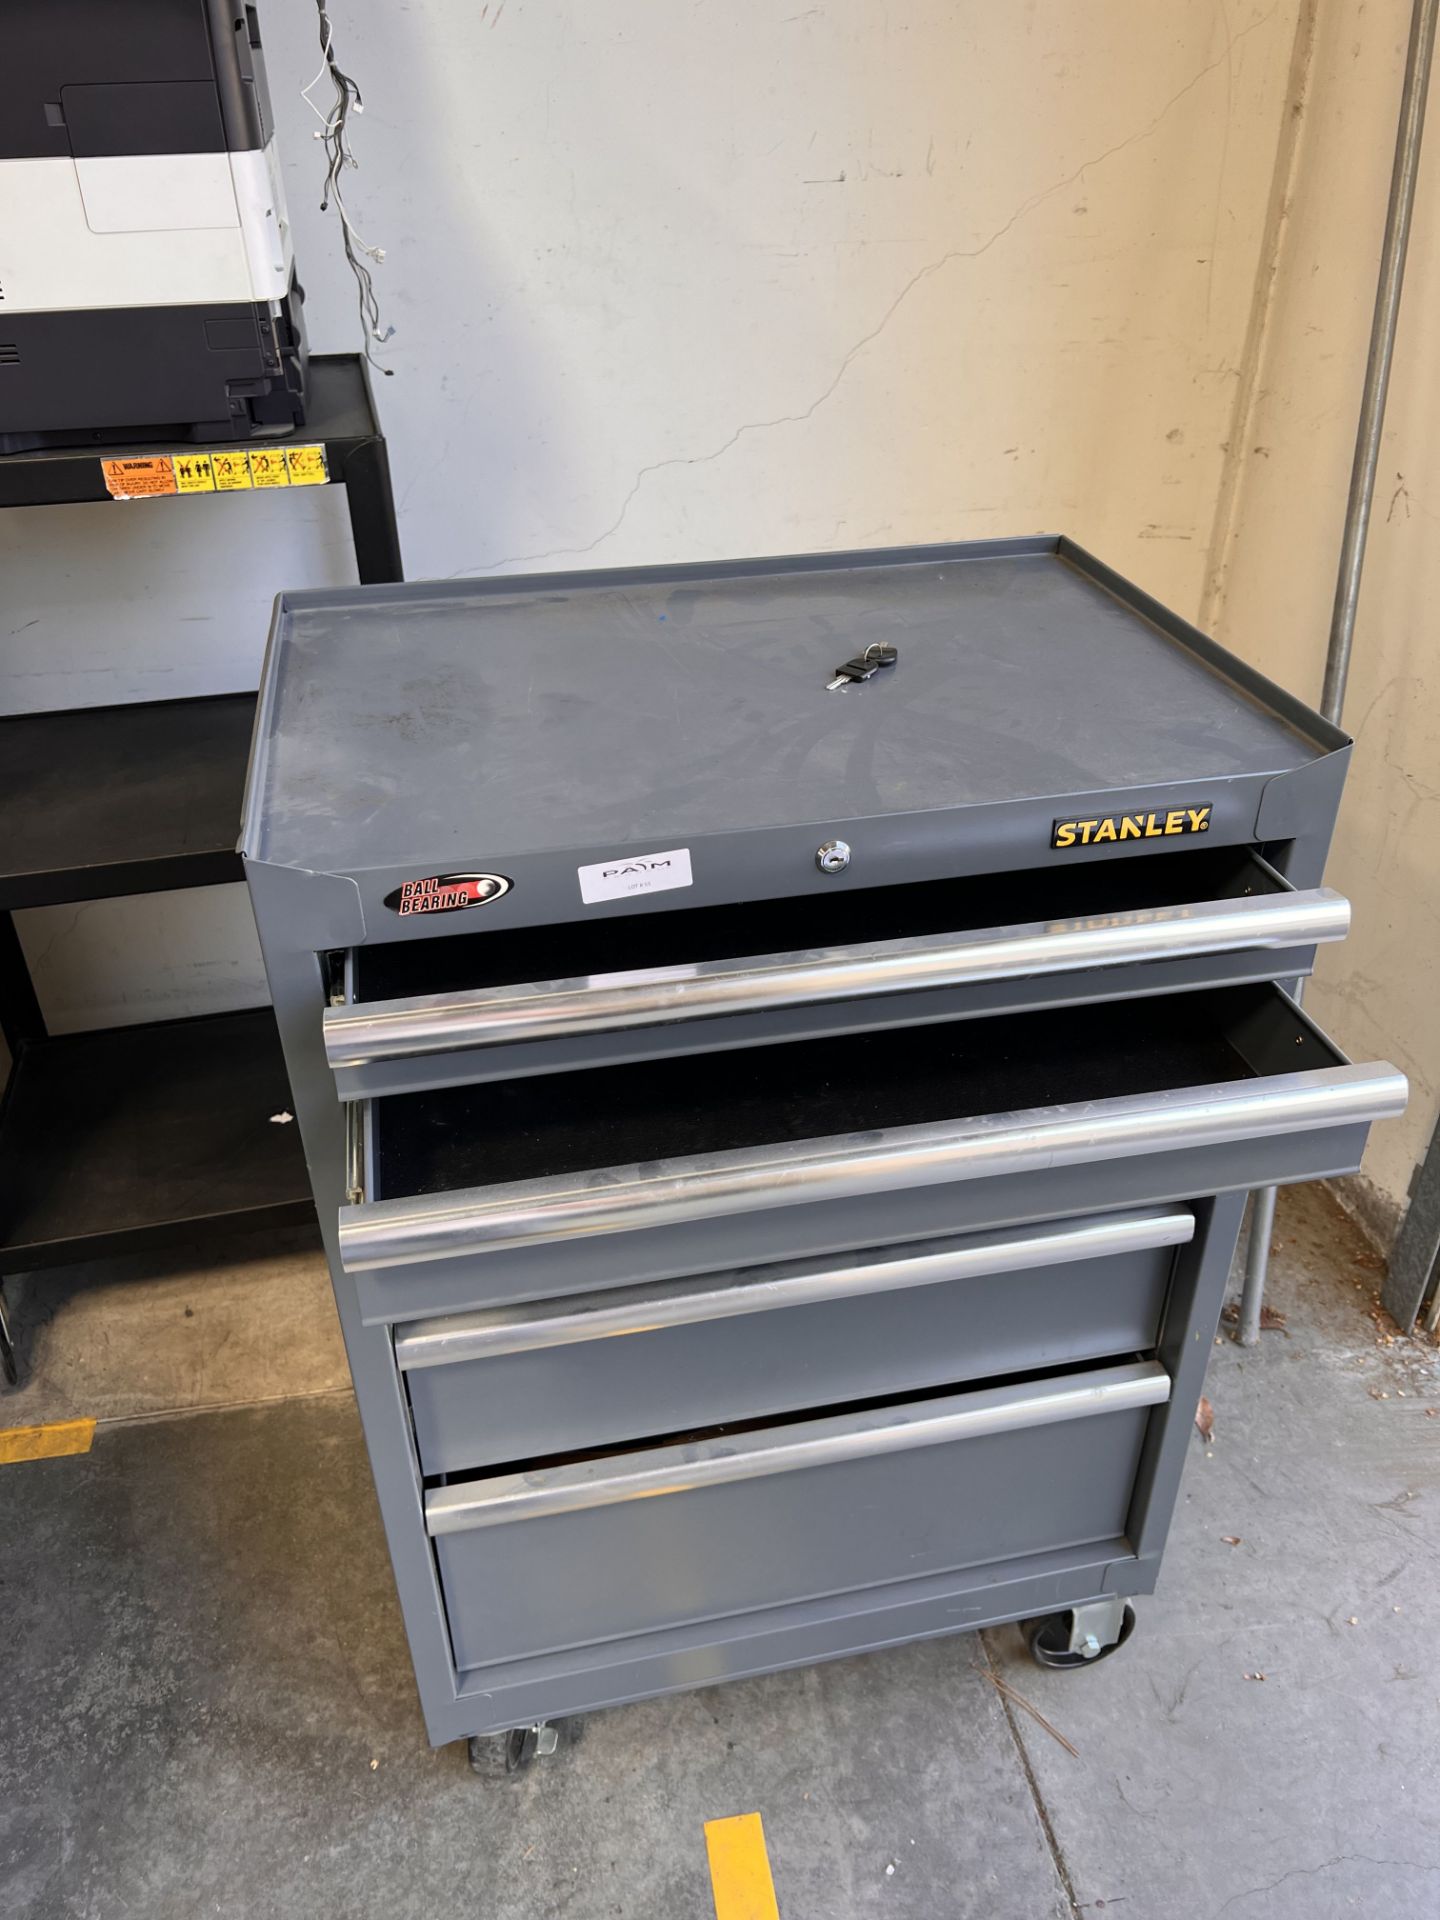 STANLEY 5 DRAWER ROLLING TOOL CABINET - Image 3 of 4